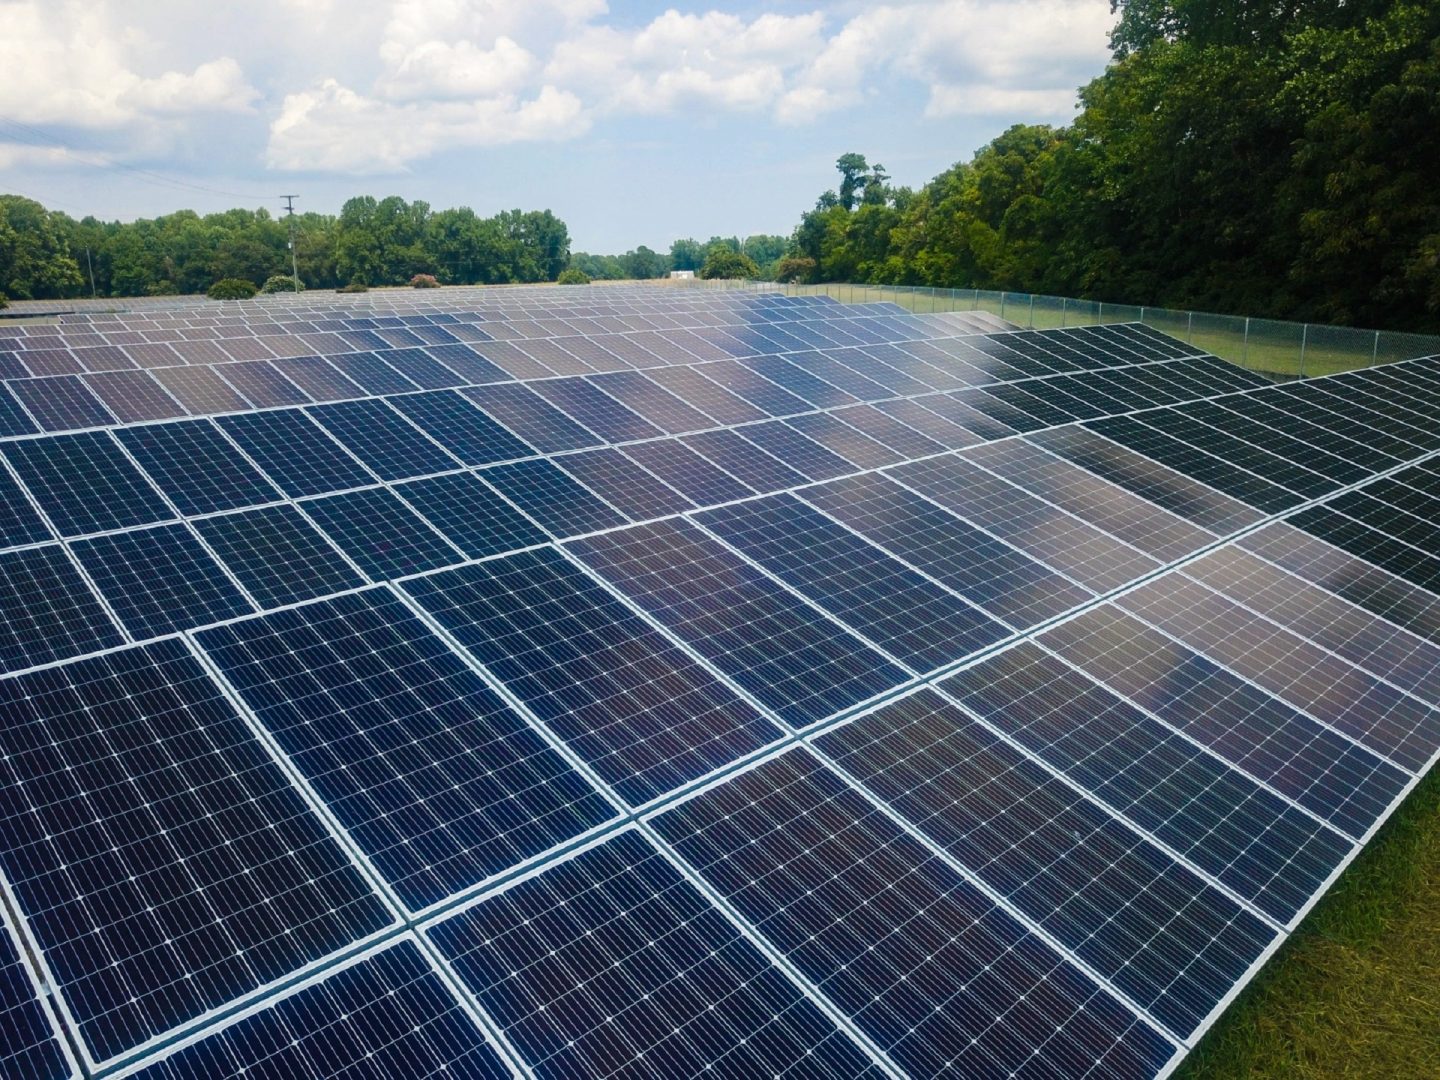 Chambersburg in entering a 20-year power purchase agreement with Virginia-based Sun Tribe on a solar facility like the one seen here.